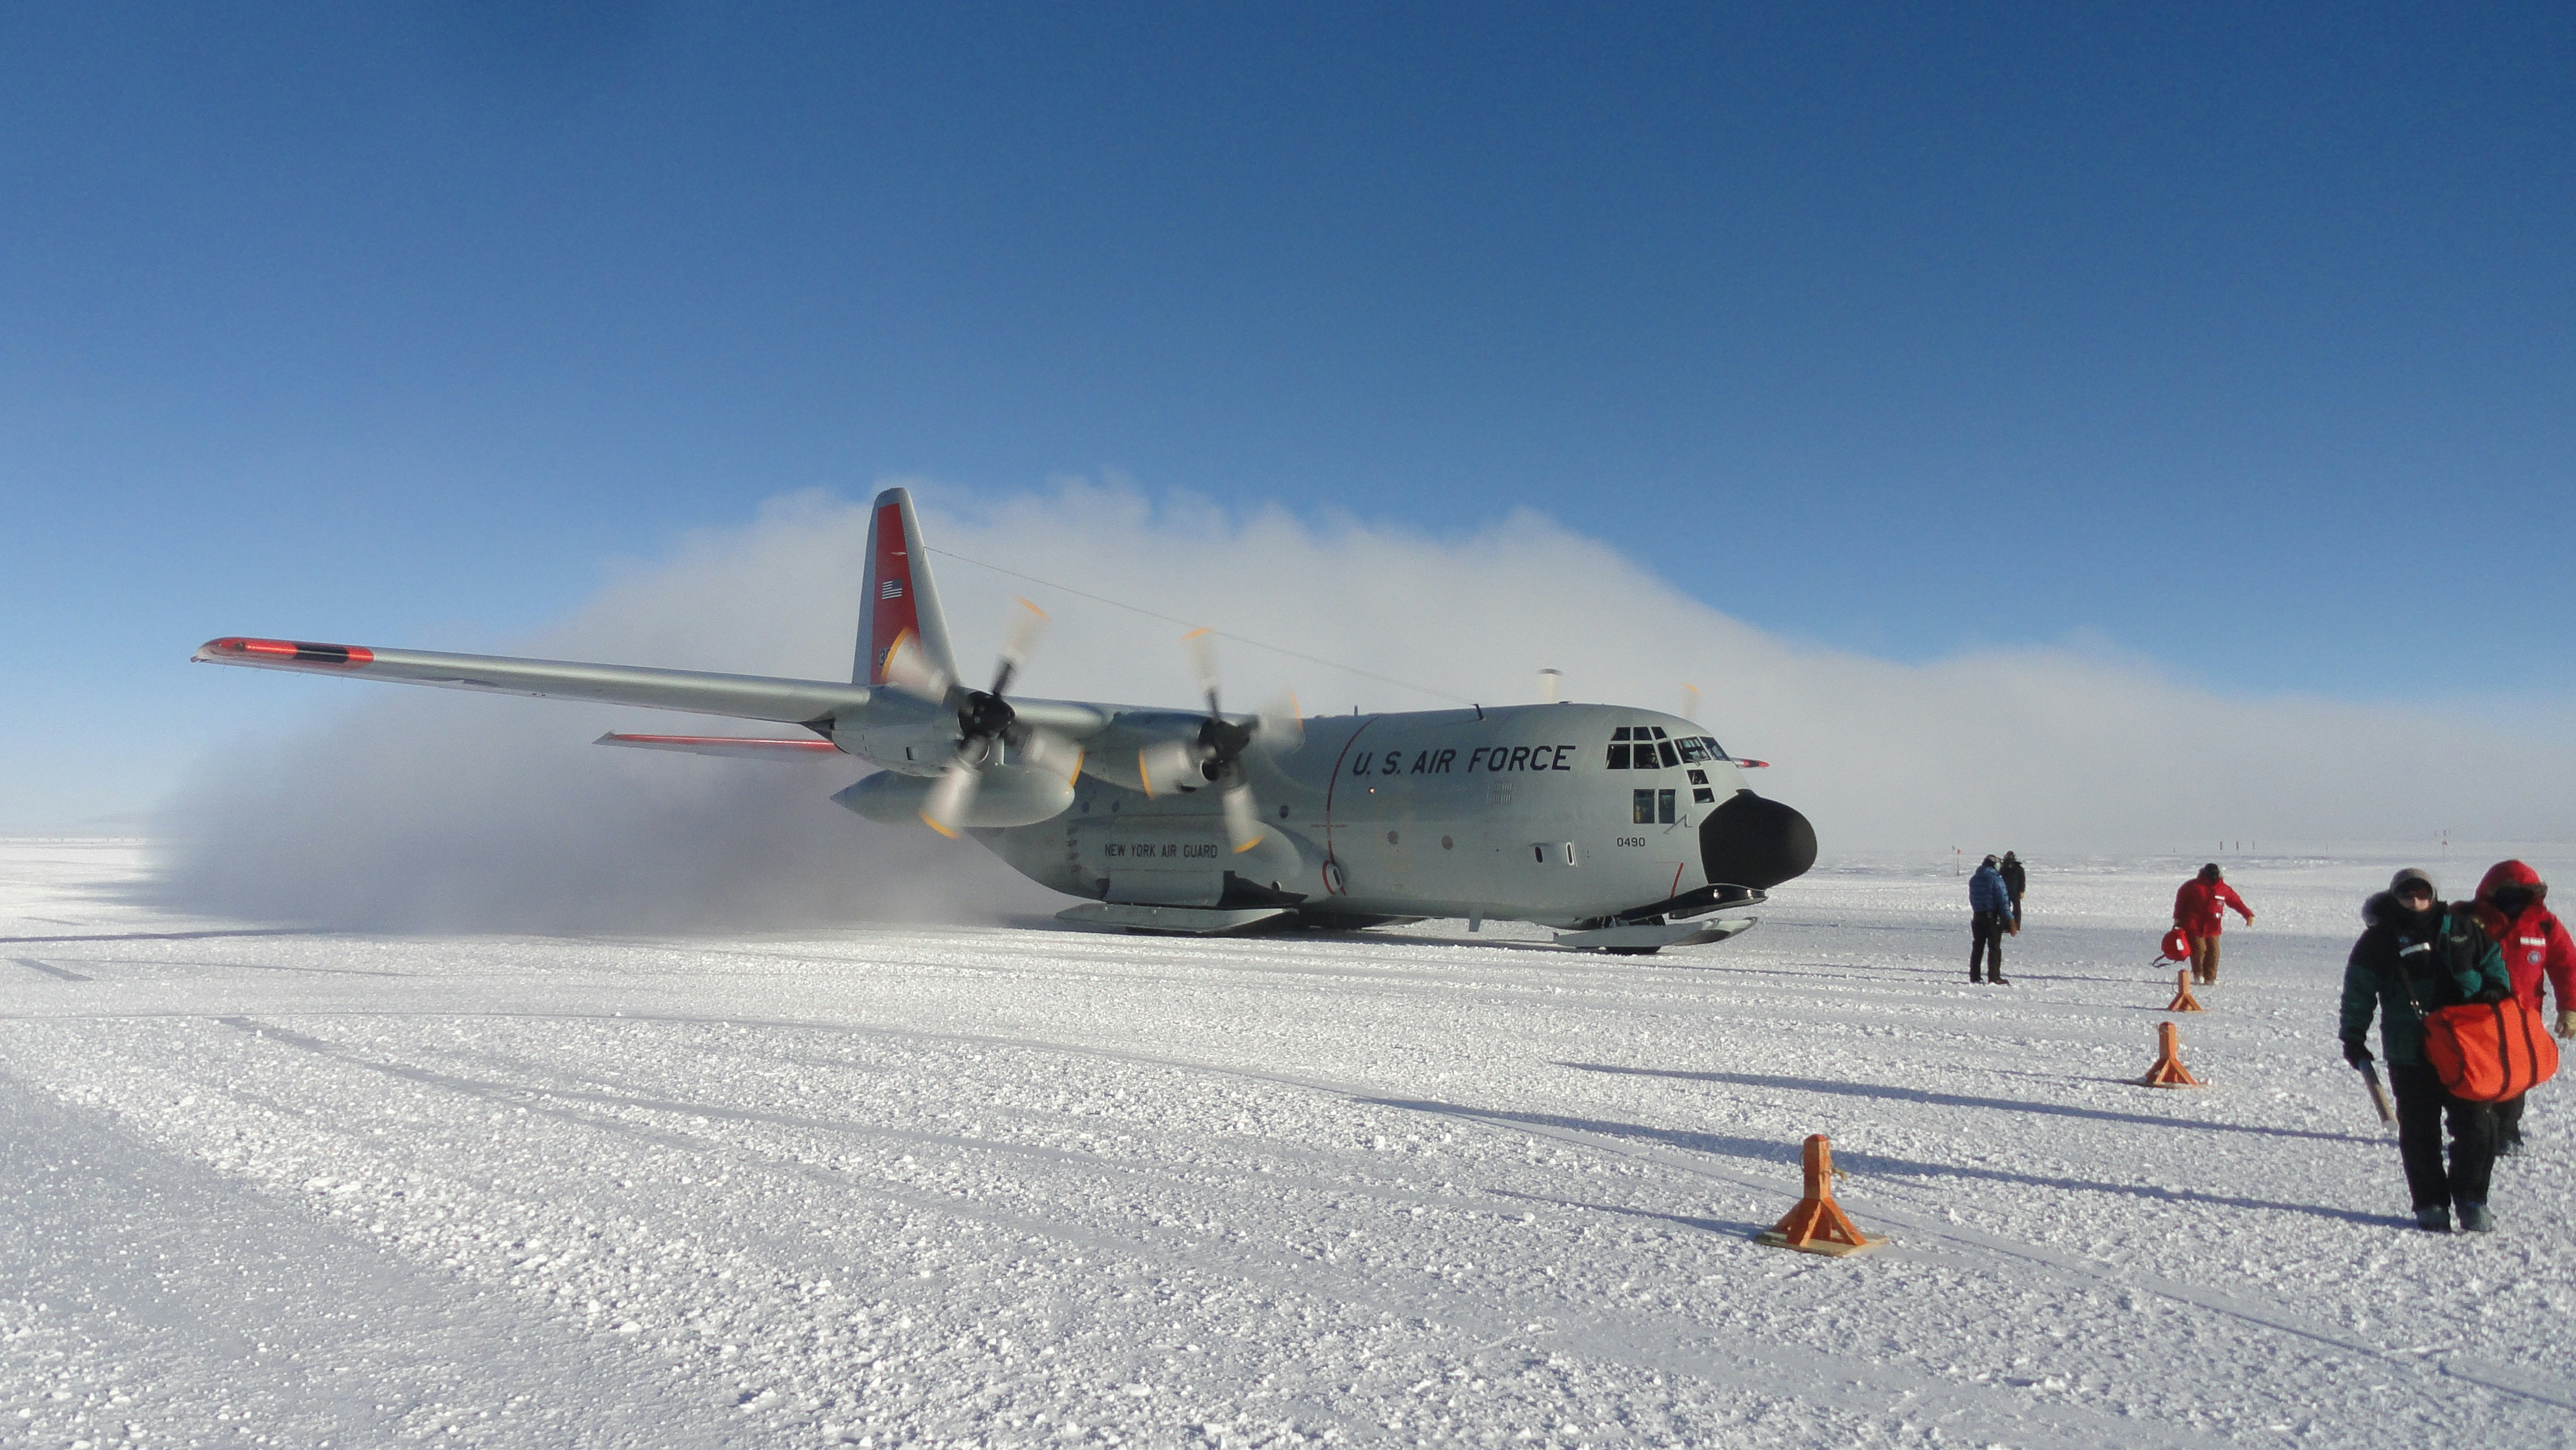 U. S. Air Force C-130 landing at South Pole Station.